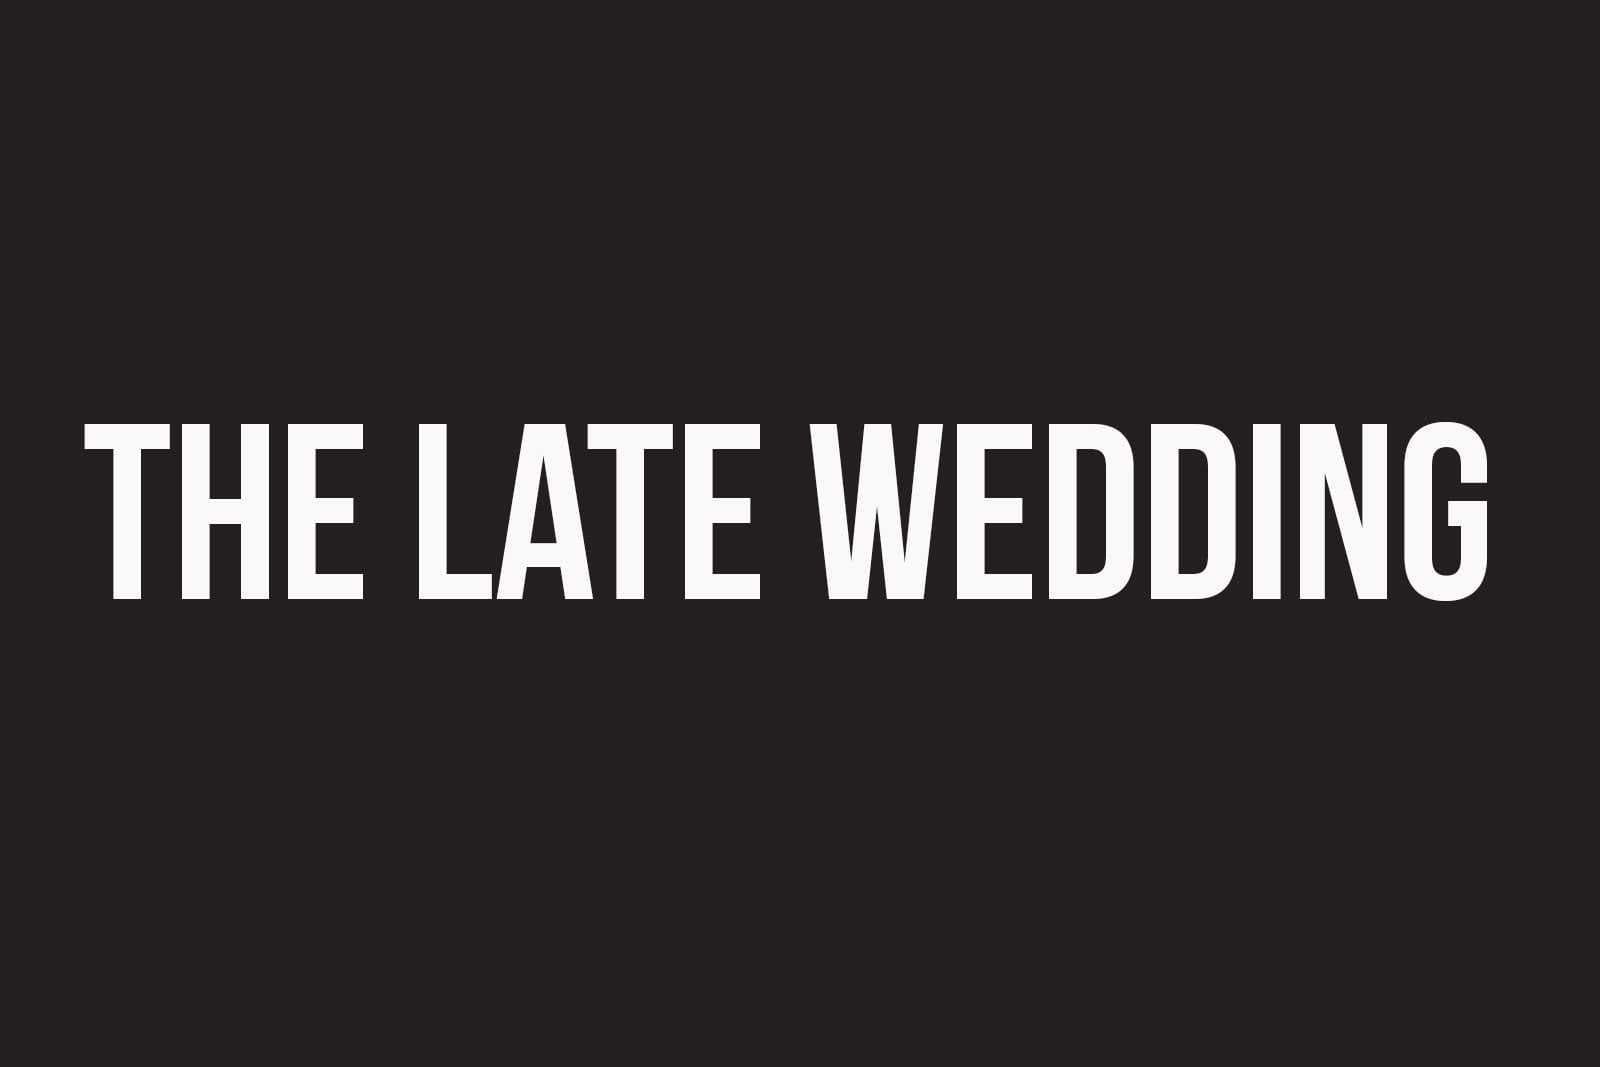 Black tile with white text that says The Late Wedding.